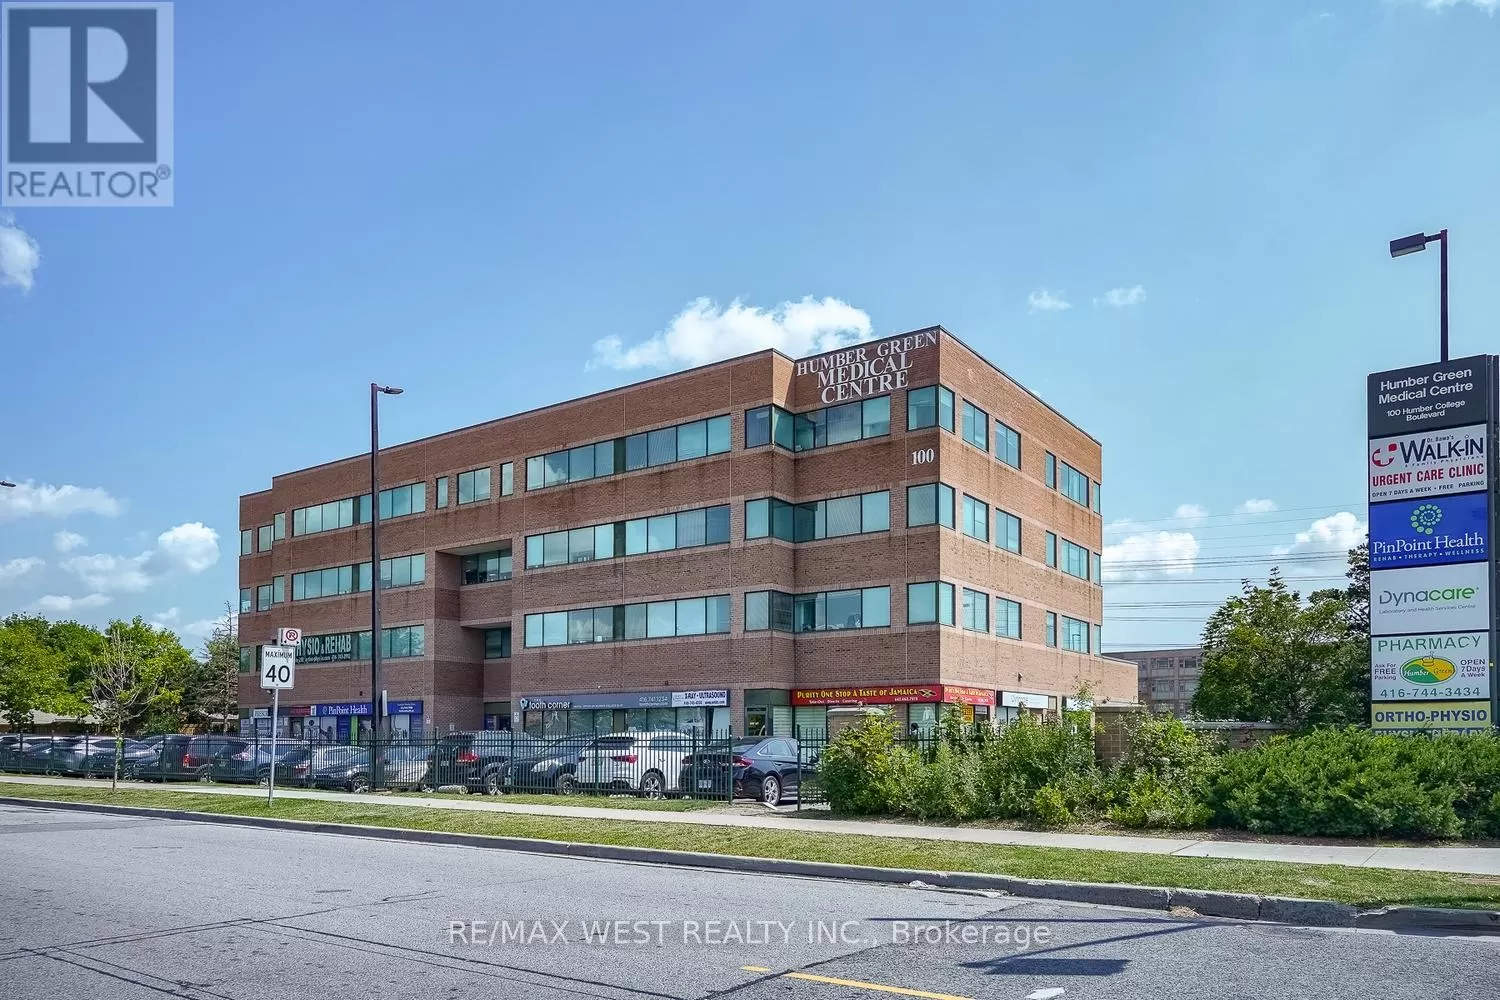 Offices for rent: #410 -100 Humber College Blvd, Toronto, Ontario M9V 5G4